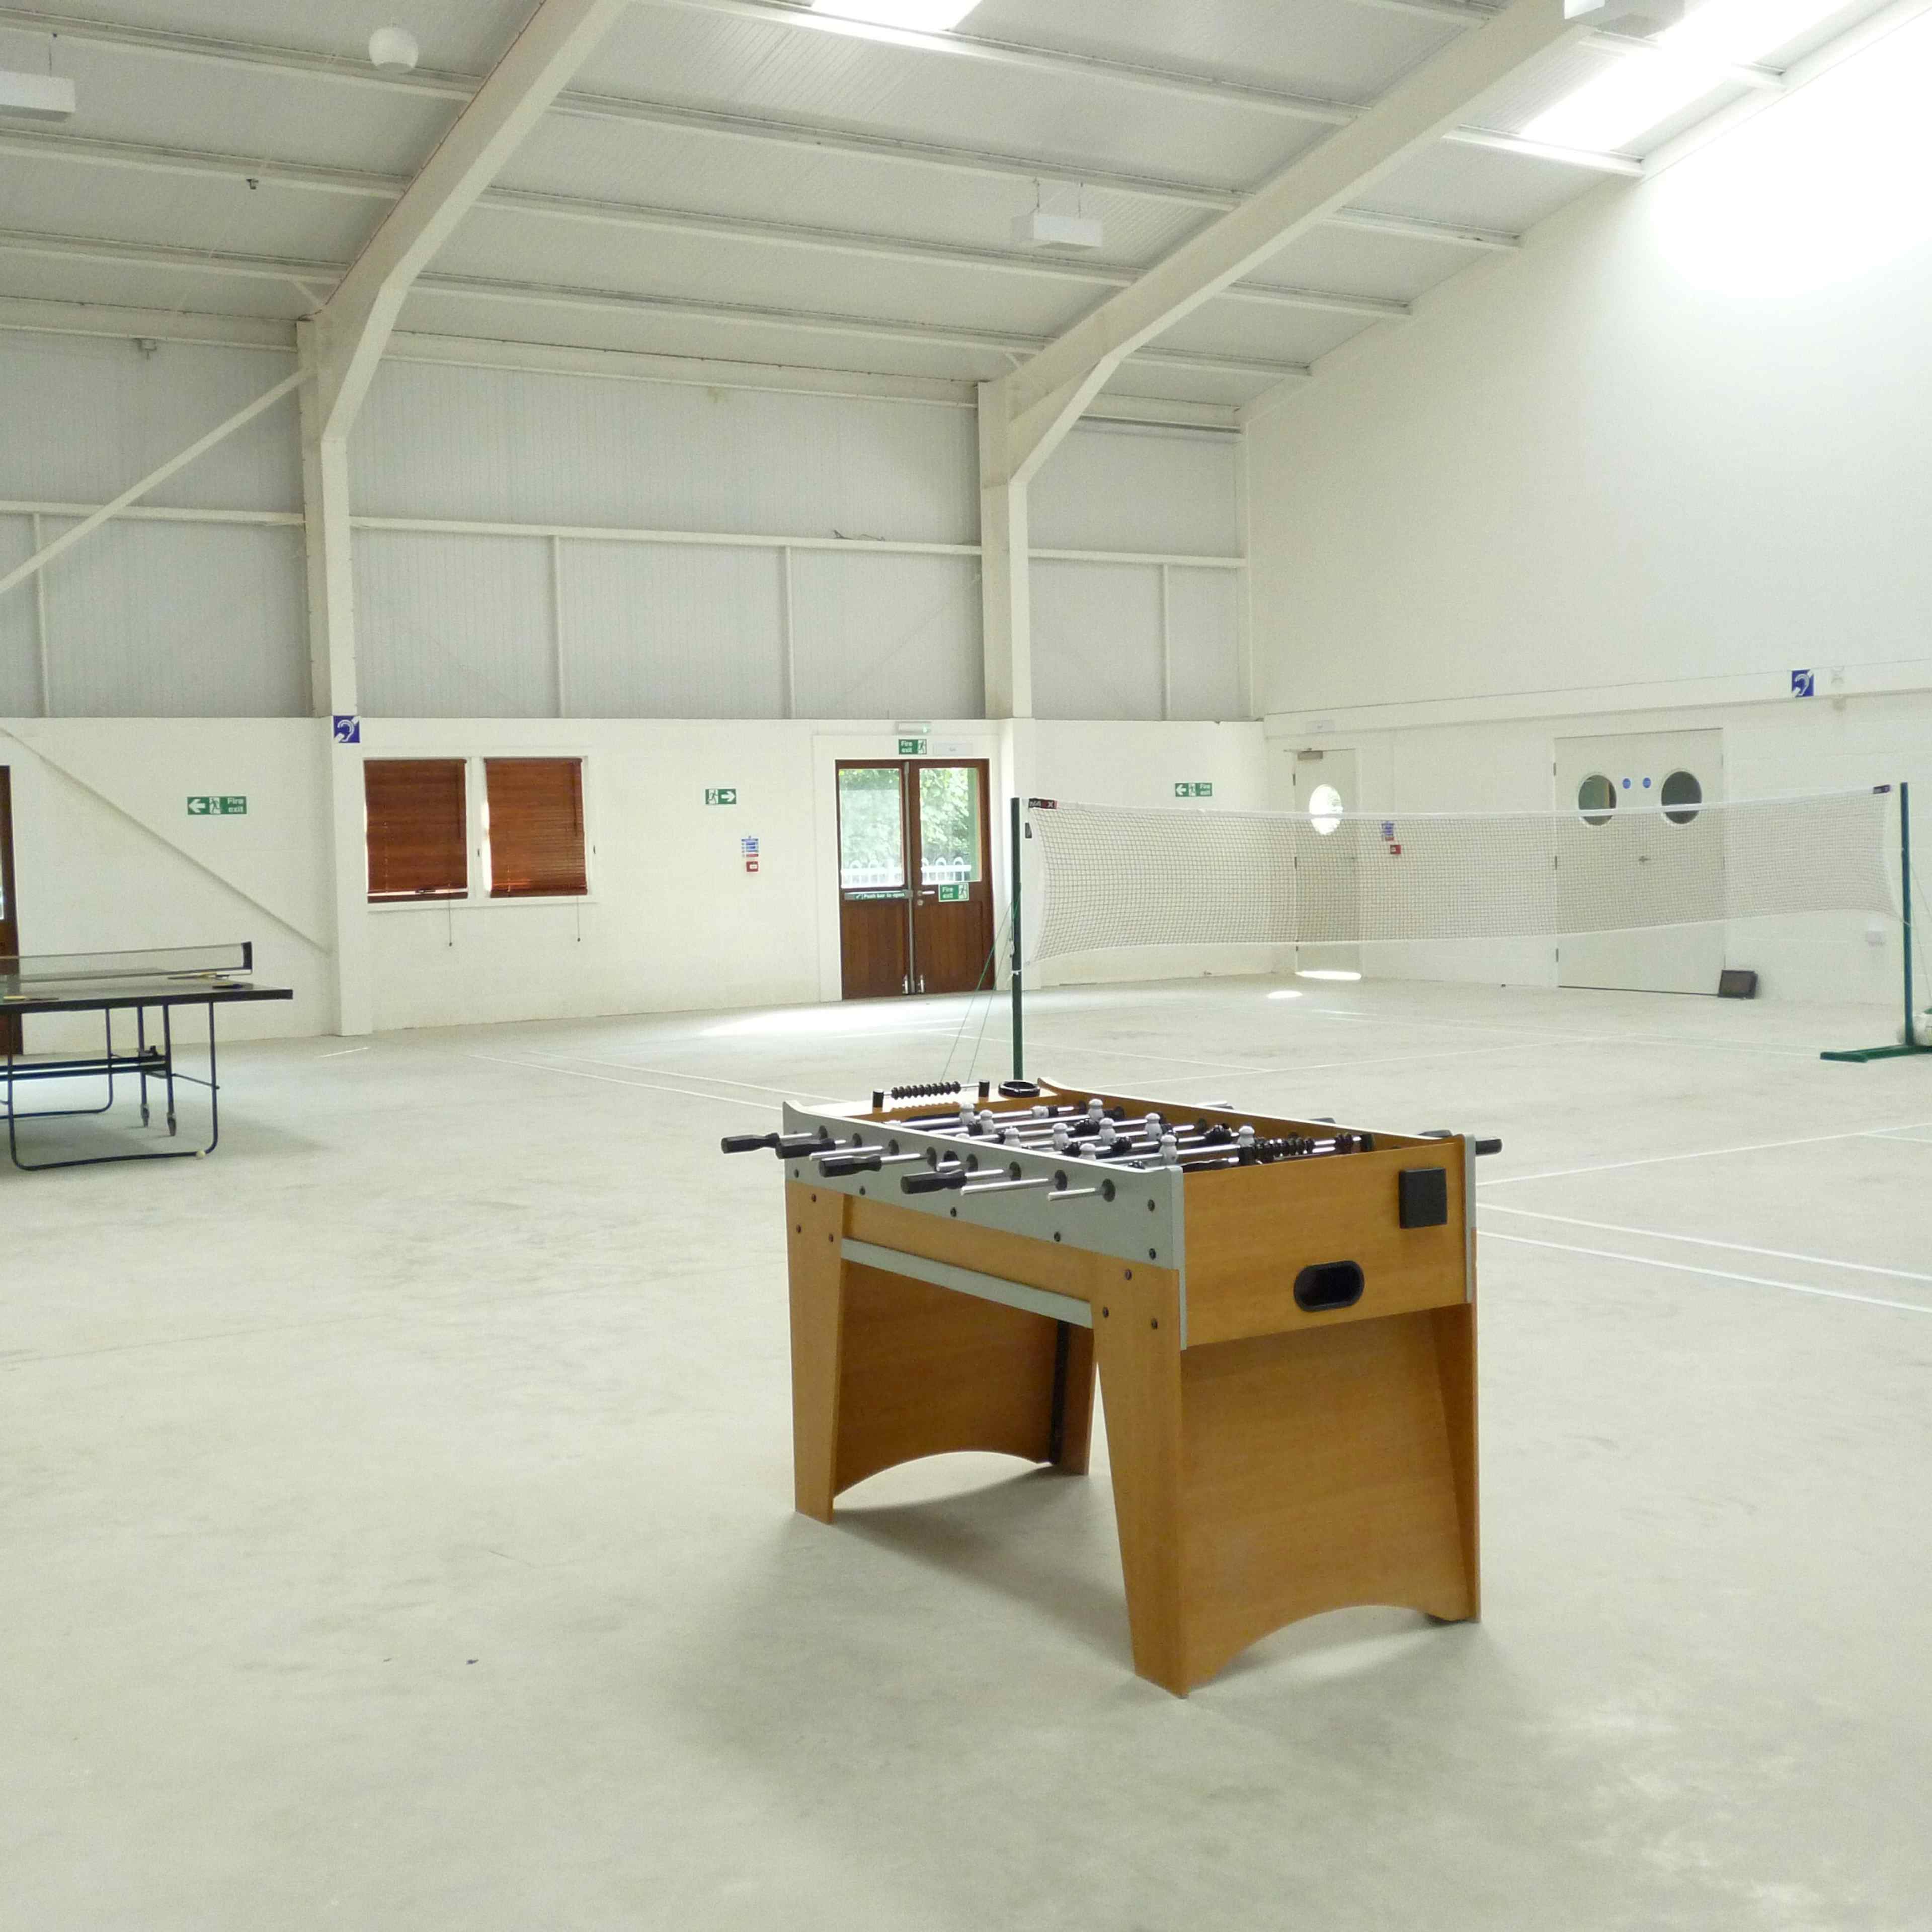 Deanwood Barn Conference Centre - Sports Hall / Conference Hall image 2